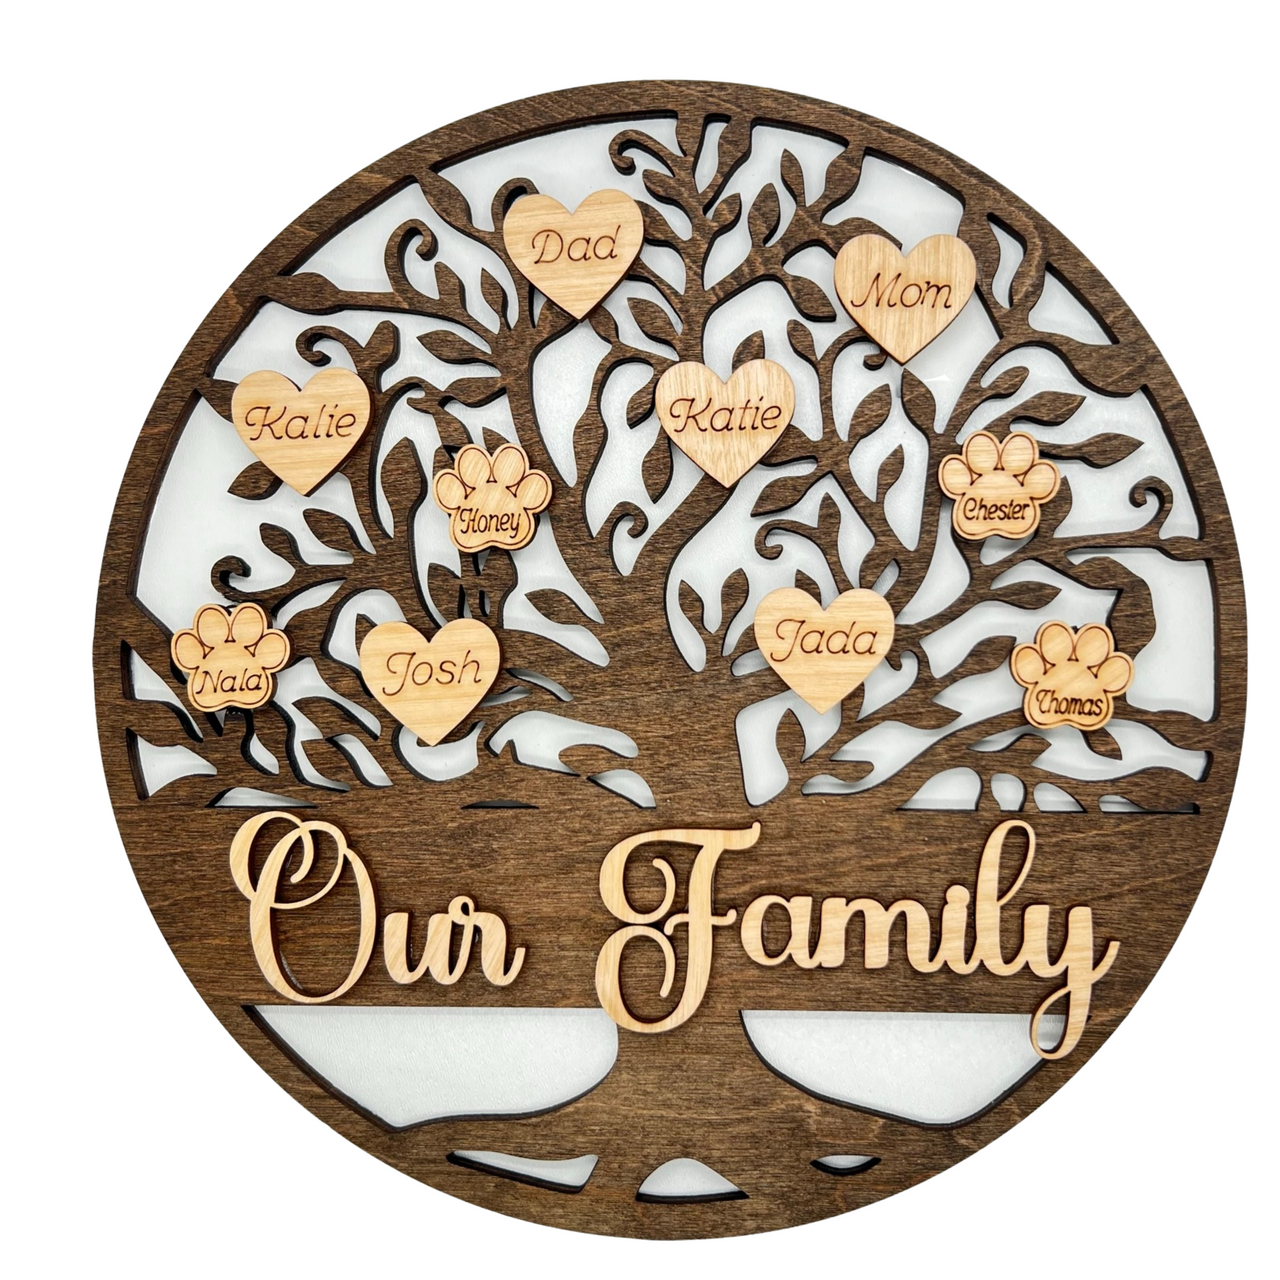 Gifts for Mom - Engraved Acrylic Block Puzzle Plaque Decorations